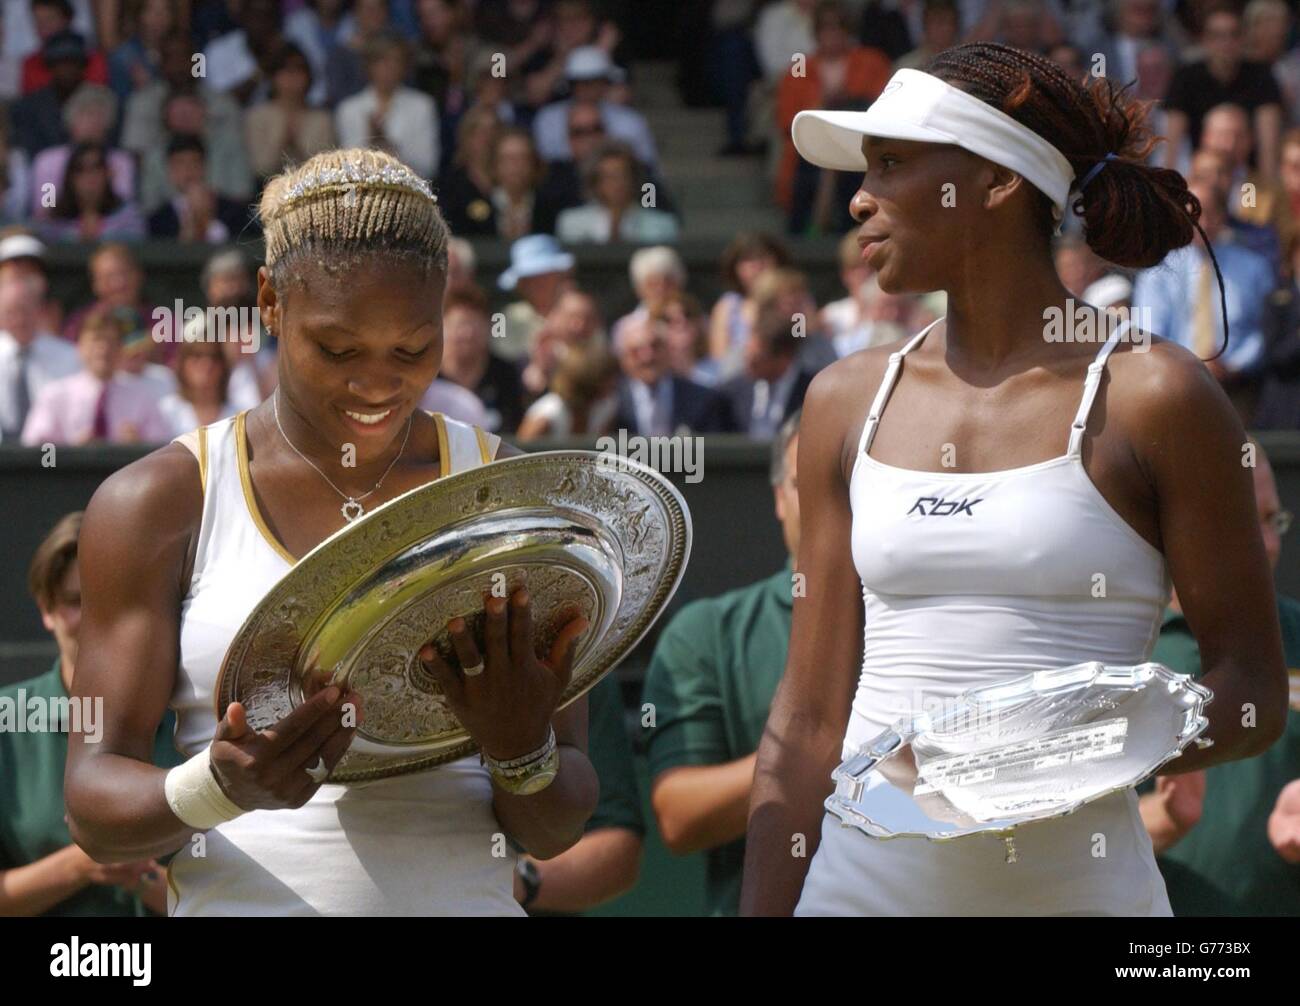 Serena Williams (left) from the USA holds her trophy after beating her sister Venus (right) in the Ladies' Singles Final at Wimbledon. * It is the first time in 118 years that sisters have met in the final at Wimbledon. Serena triumphed in straight sets 7:6/6:3. Stock Photo